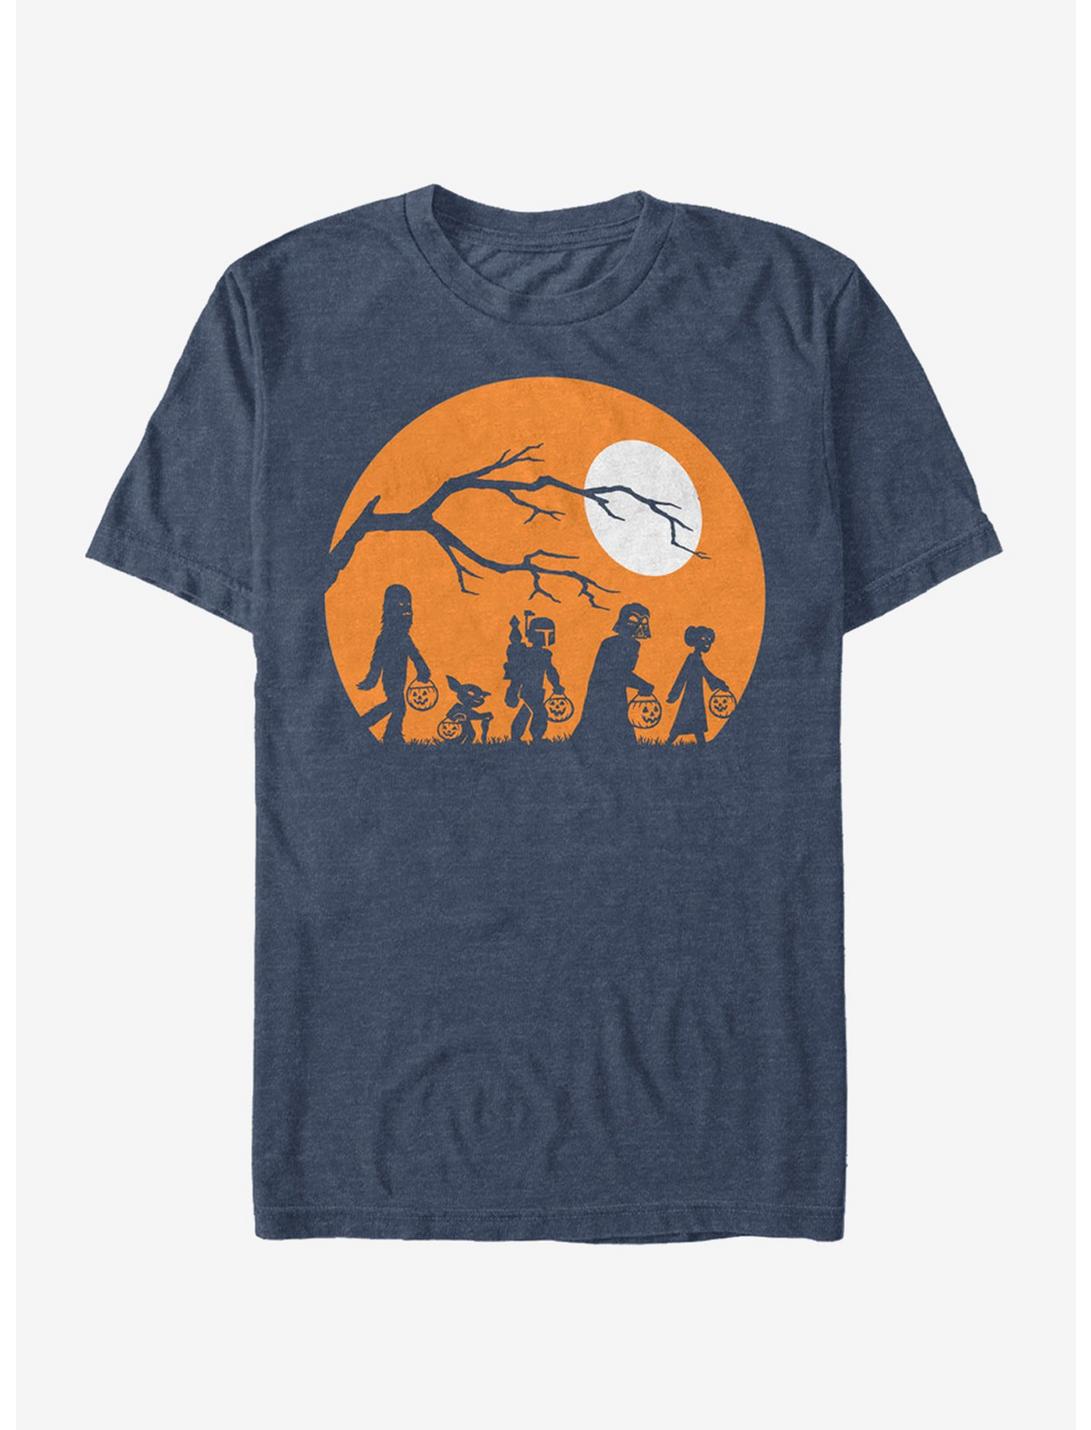 Star Wars Halloween Characters Trick or Treat T-Shirt, NAVY, hi-res